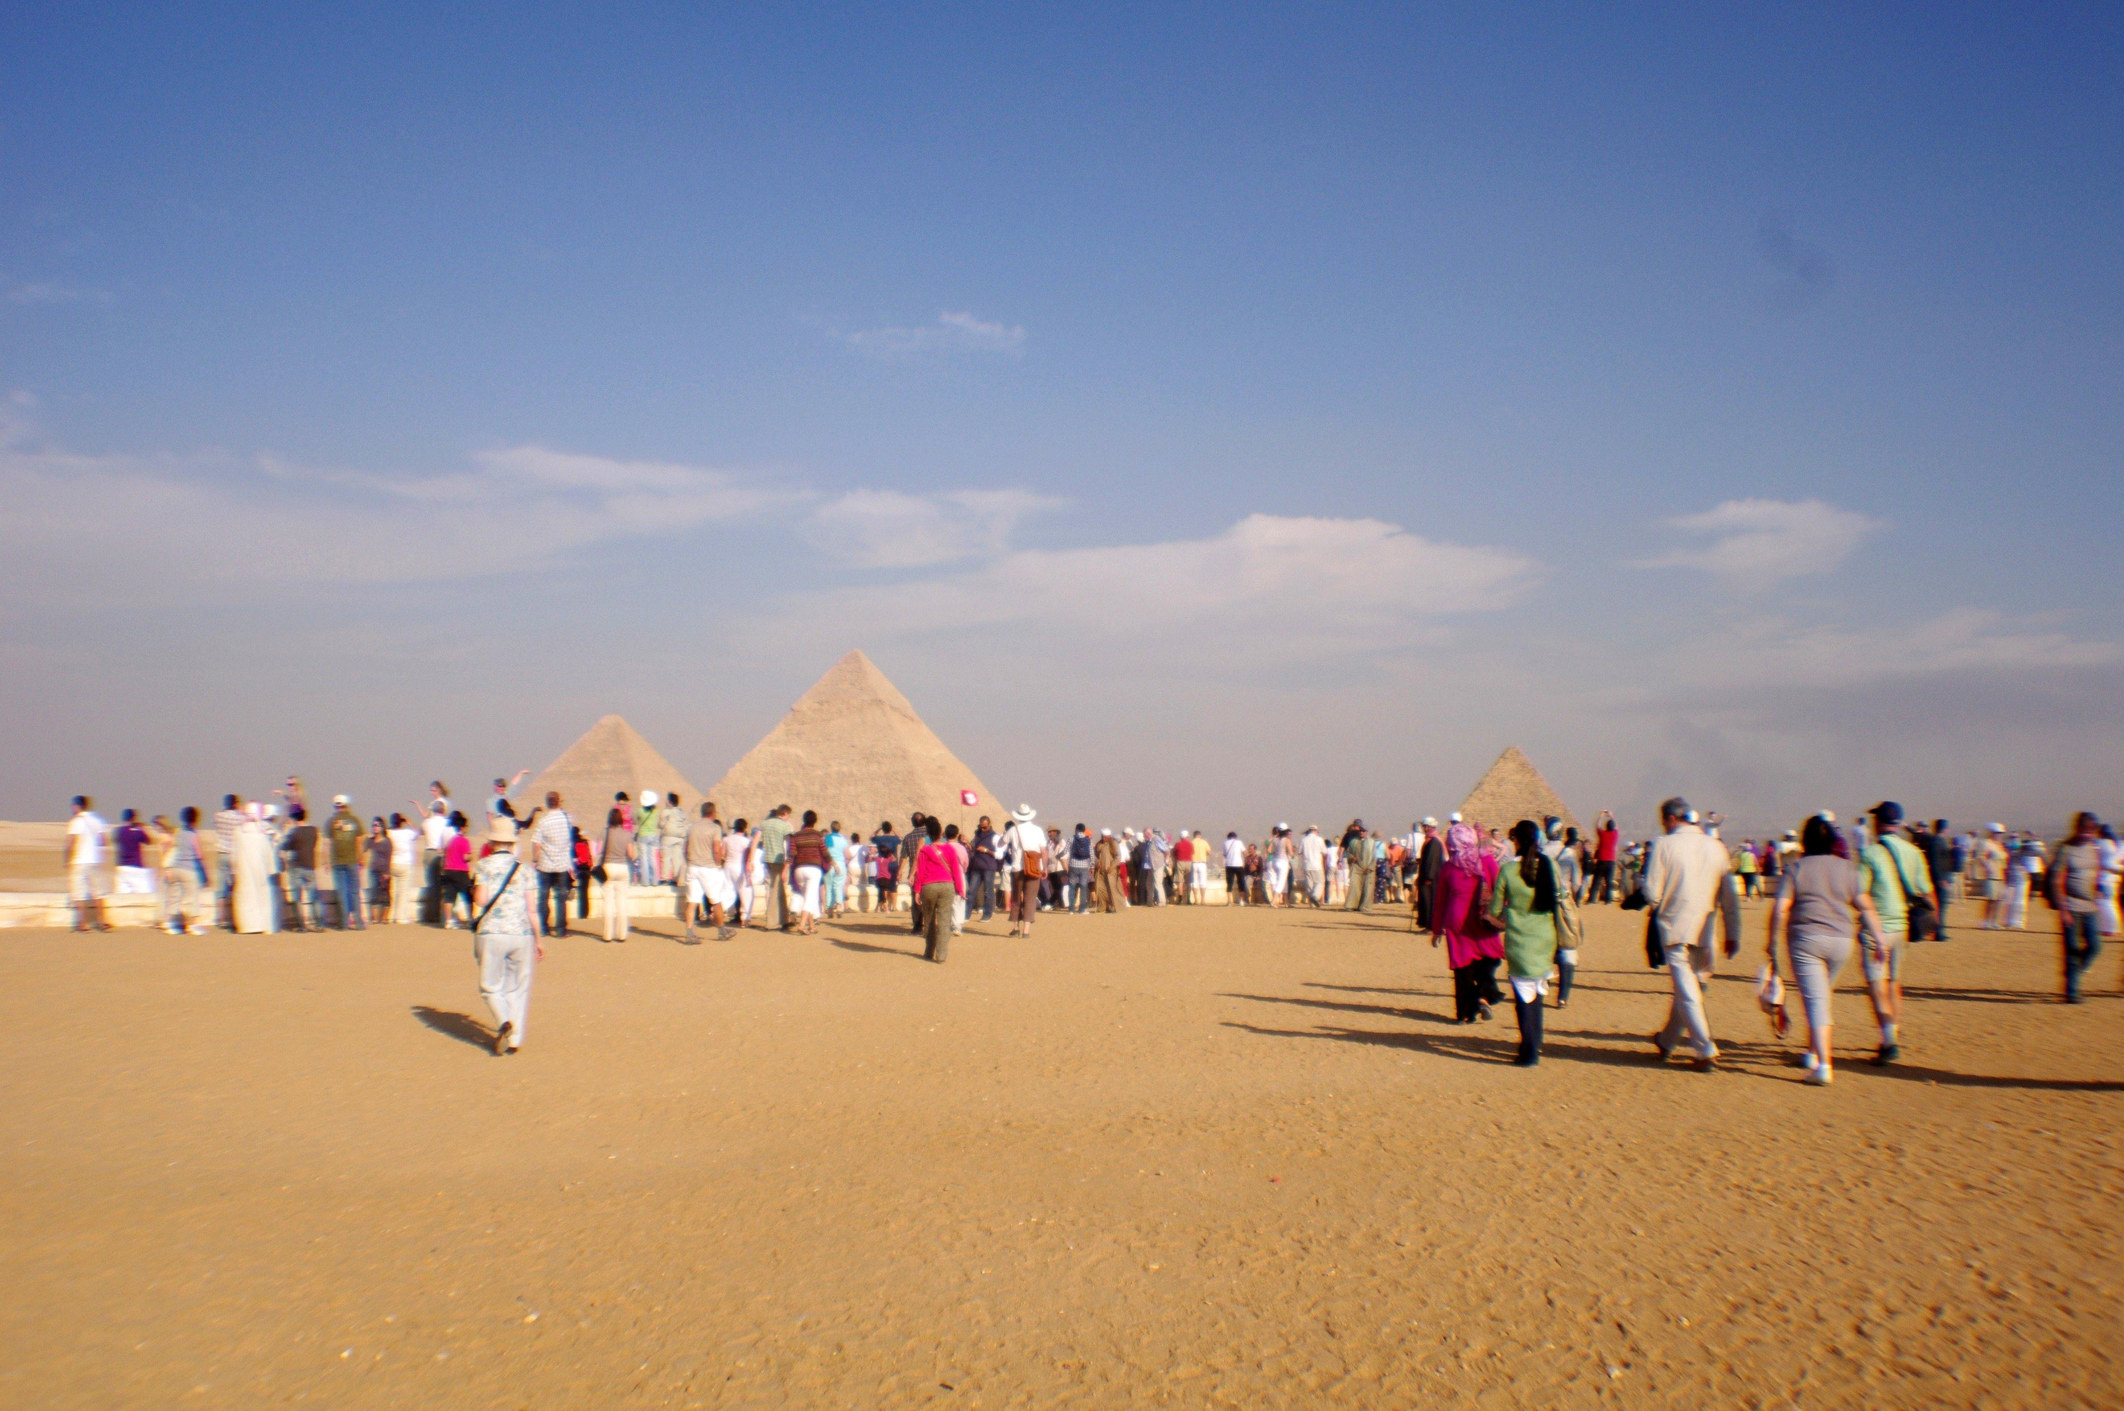 Sightseers at the pyramids of Giza.